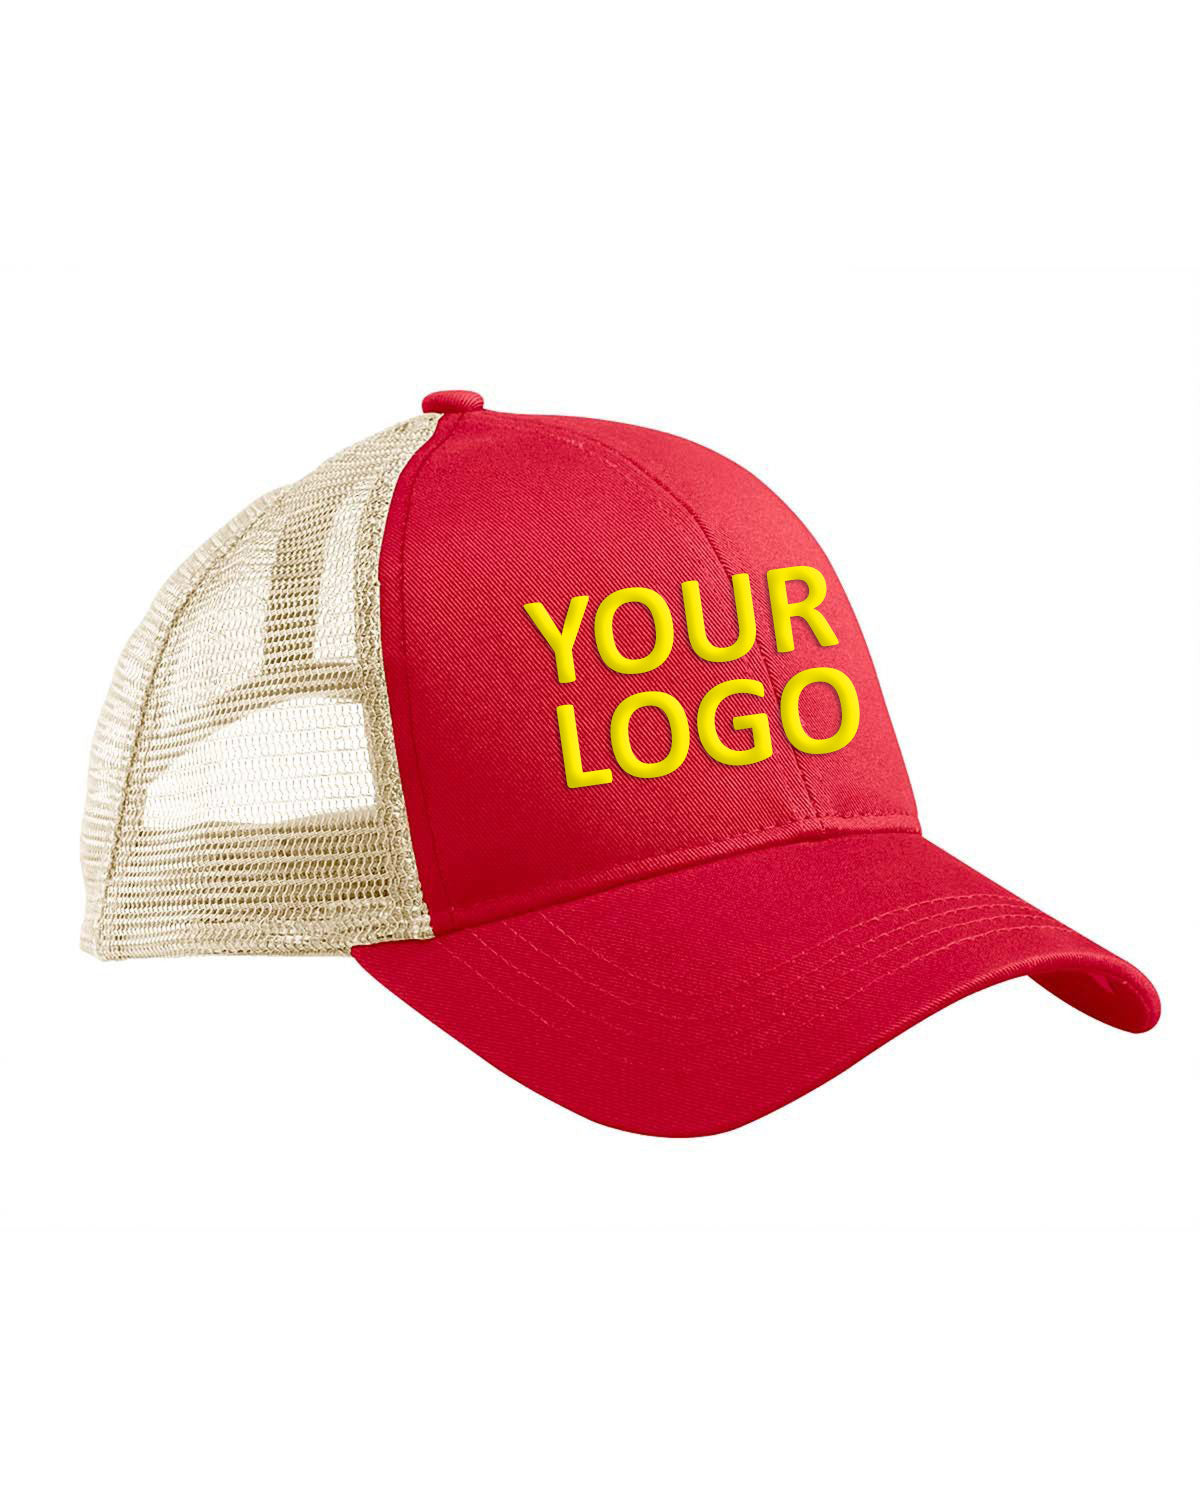 Econscious Eco Trucker Customized Hats, Red/ Oyster